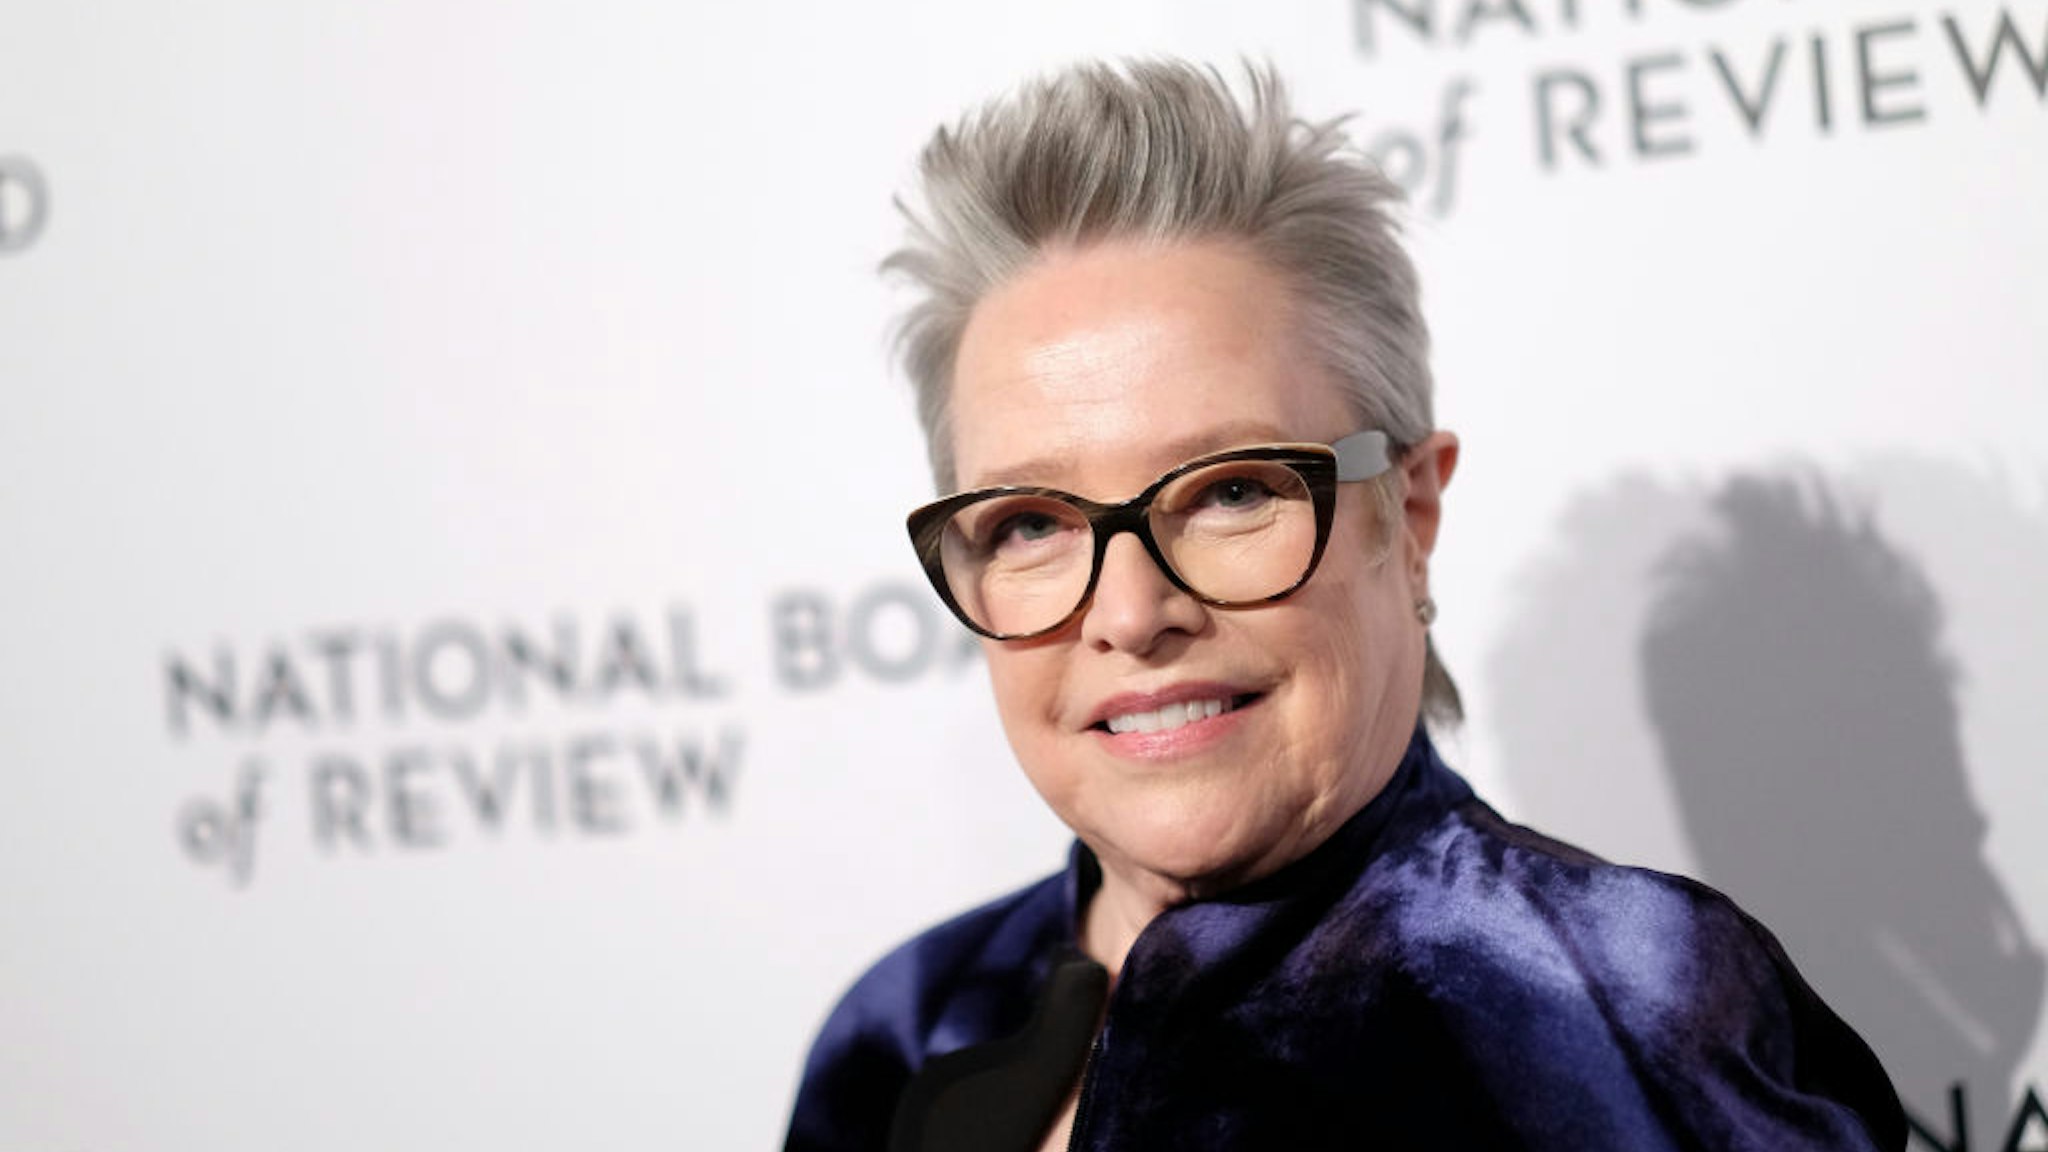 Kathy Bates attends The National Board of Review Annual Awards Gala at Cipriani 42nd Street on January 08, 2020 in New York City.